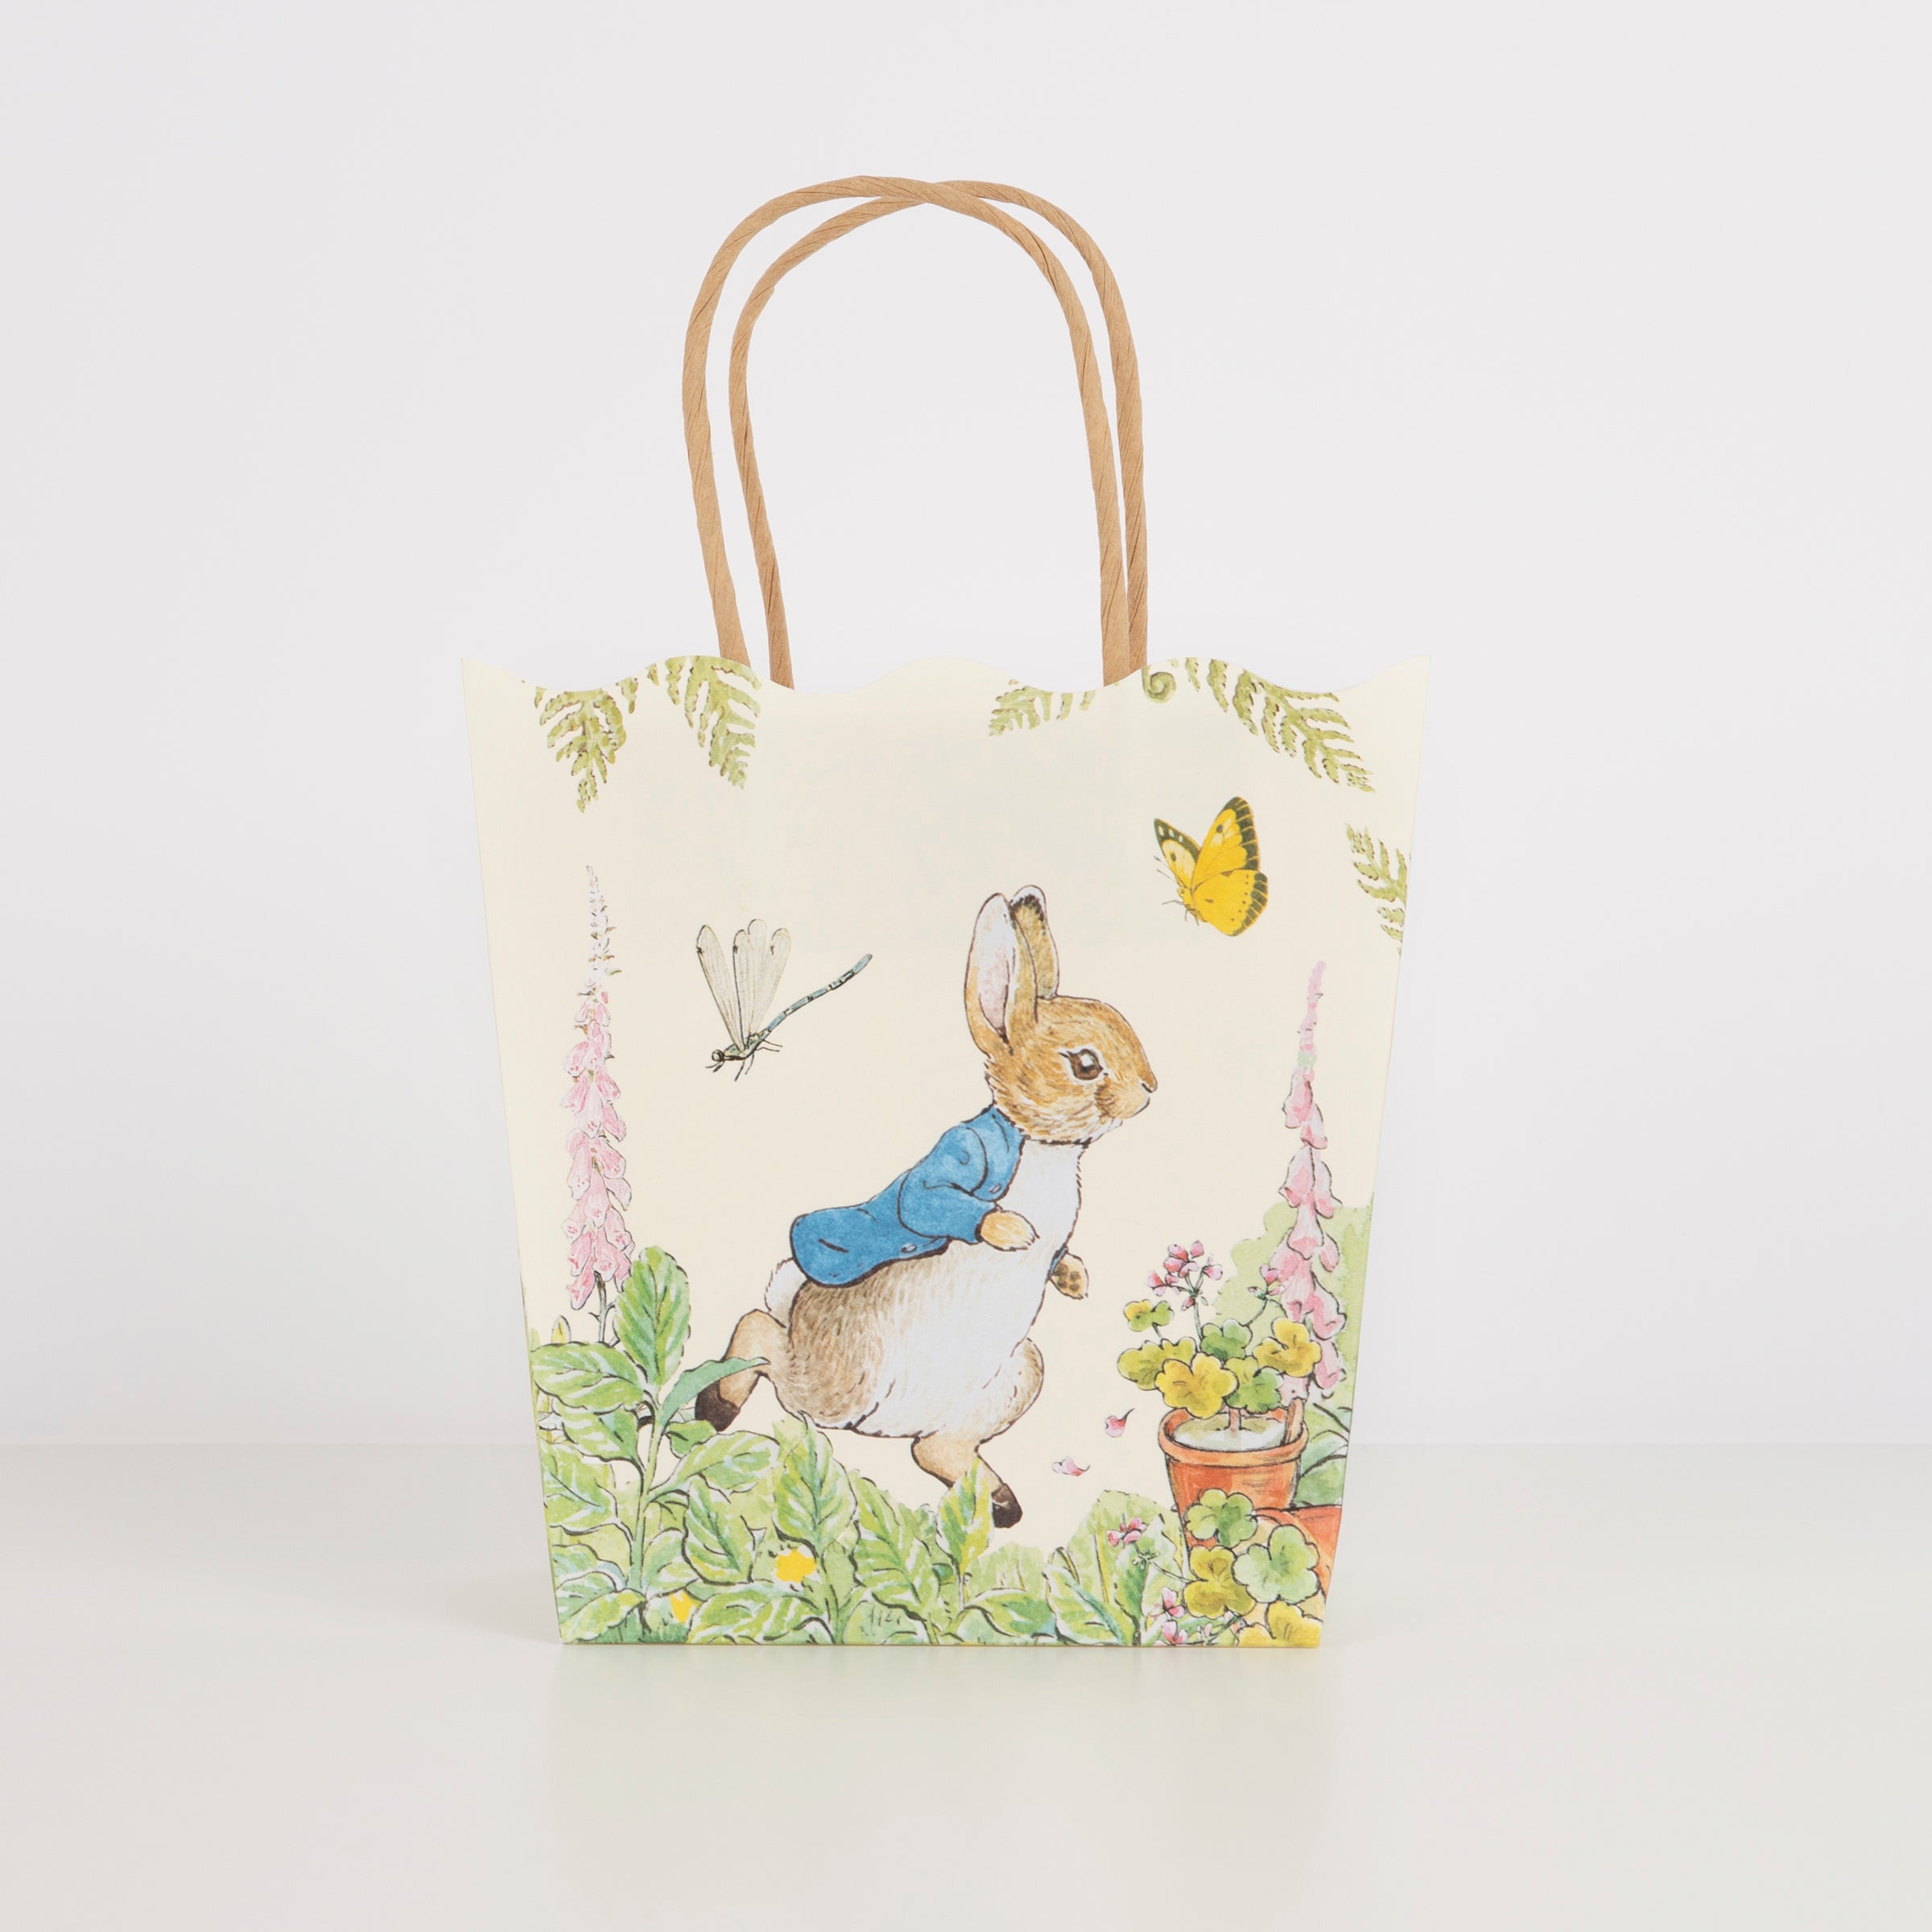 Our special party bags for kids feature Peter Rabbit, scalloped borders and paper handles.